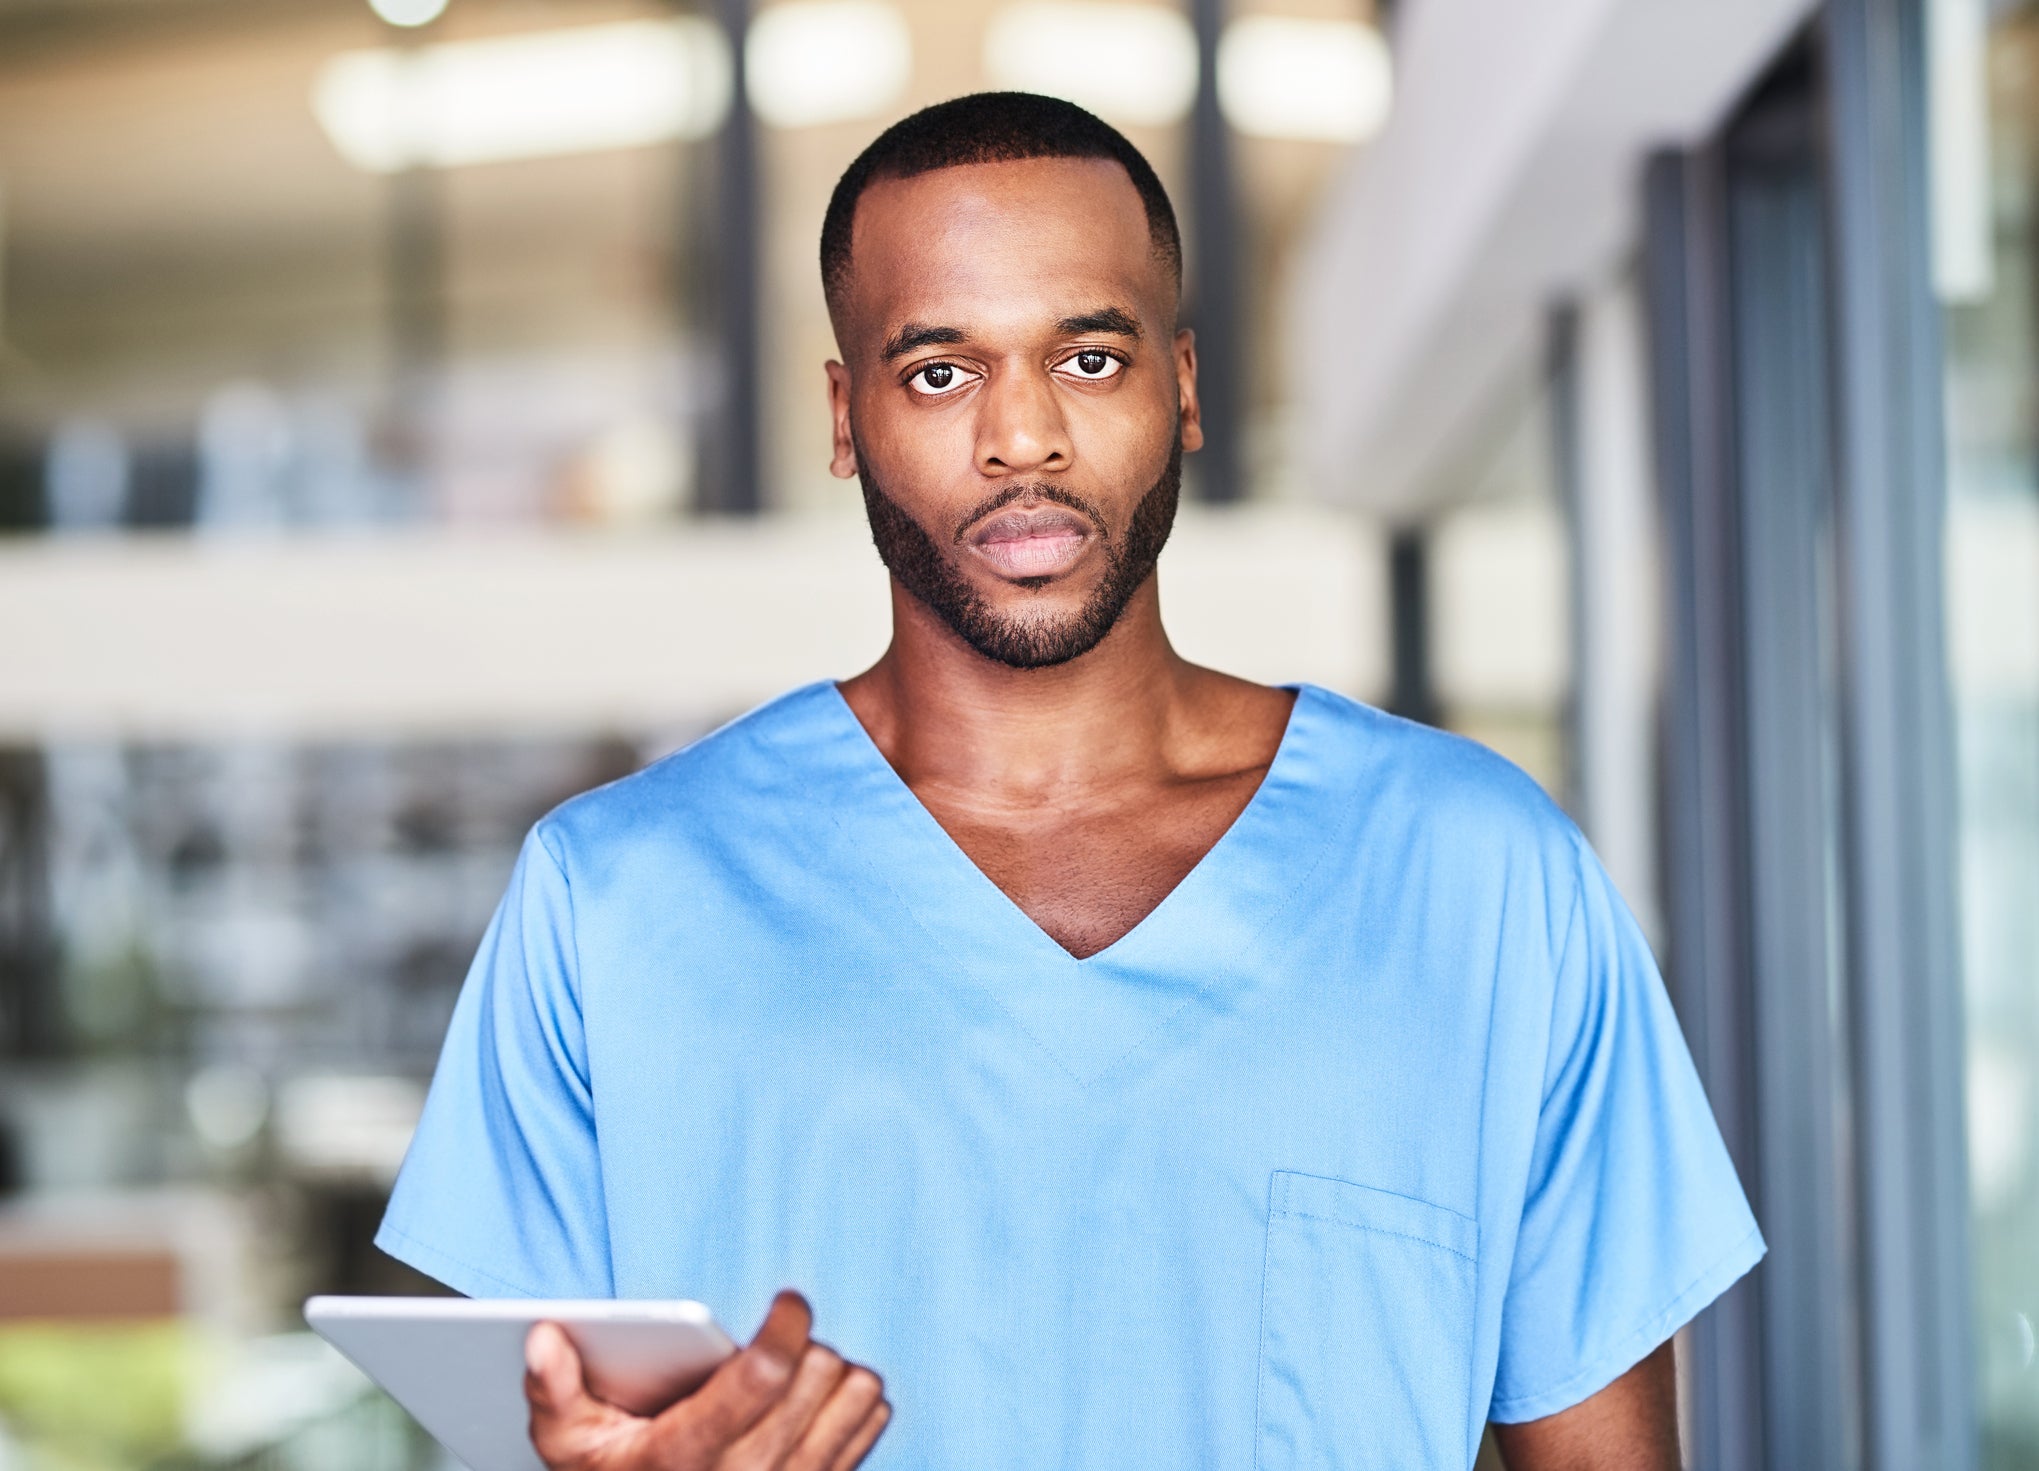 What Black Doctors And Nurses Want You To Know About COVID-19